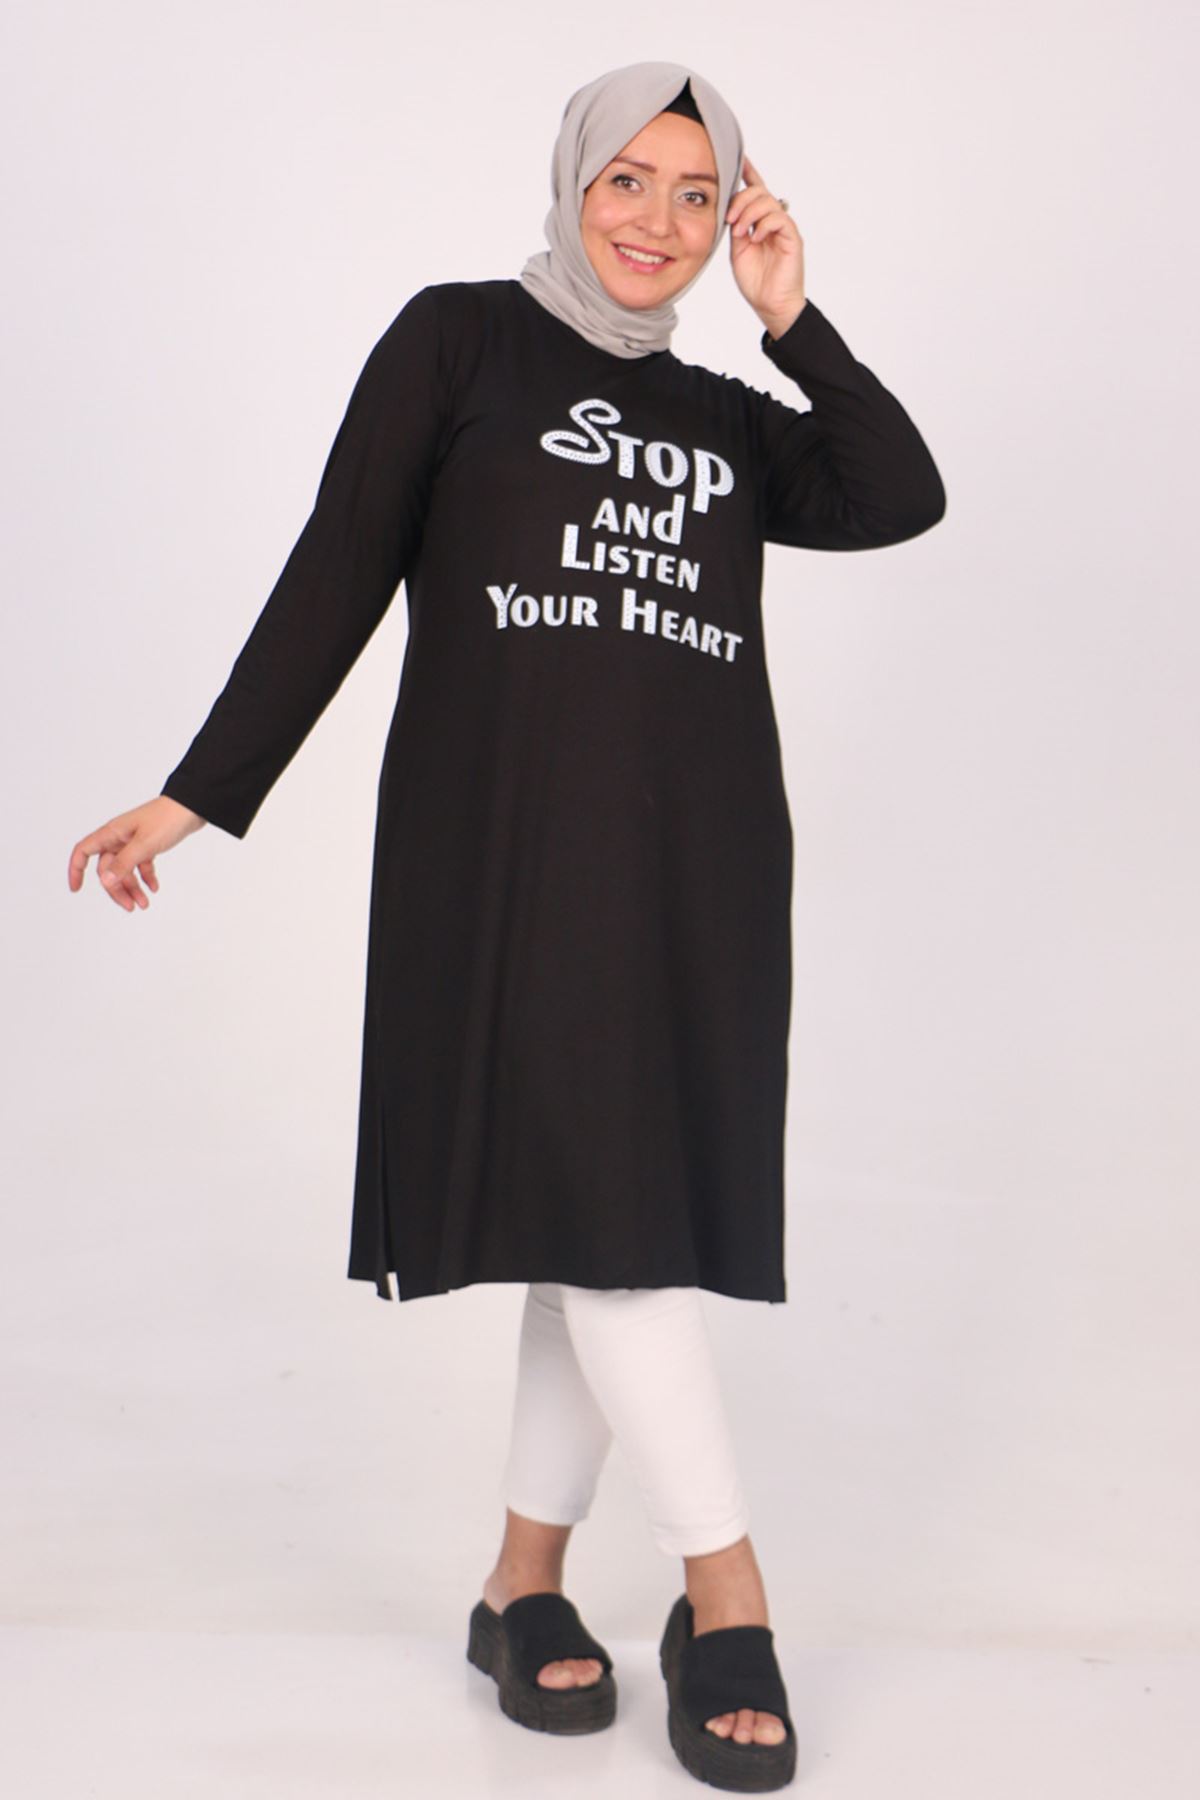 38126 Large Size Combed Cotton Printed Tunic -Black